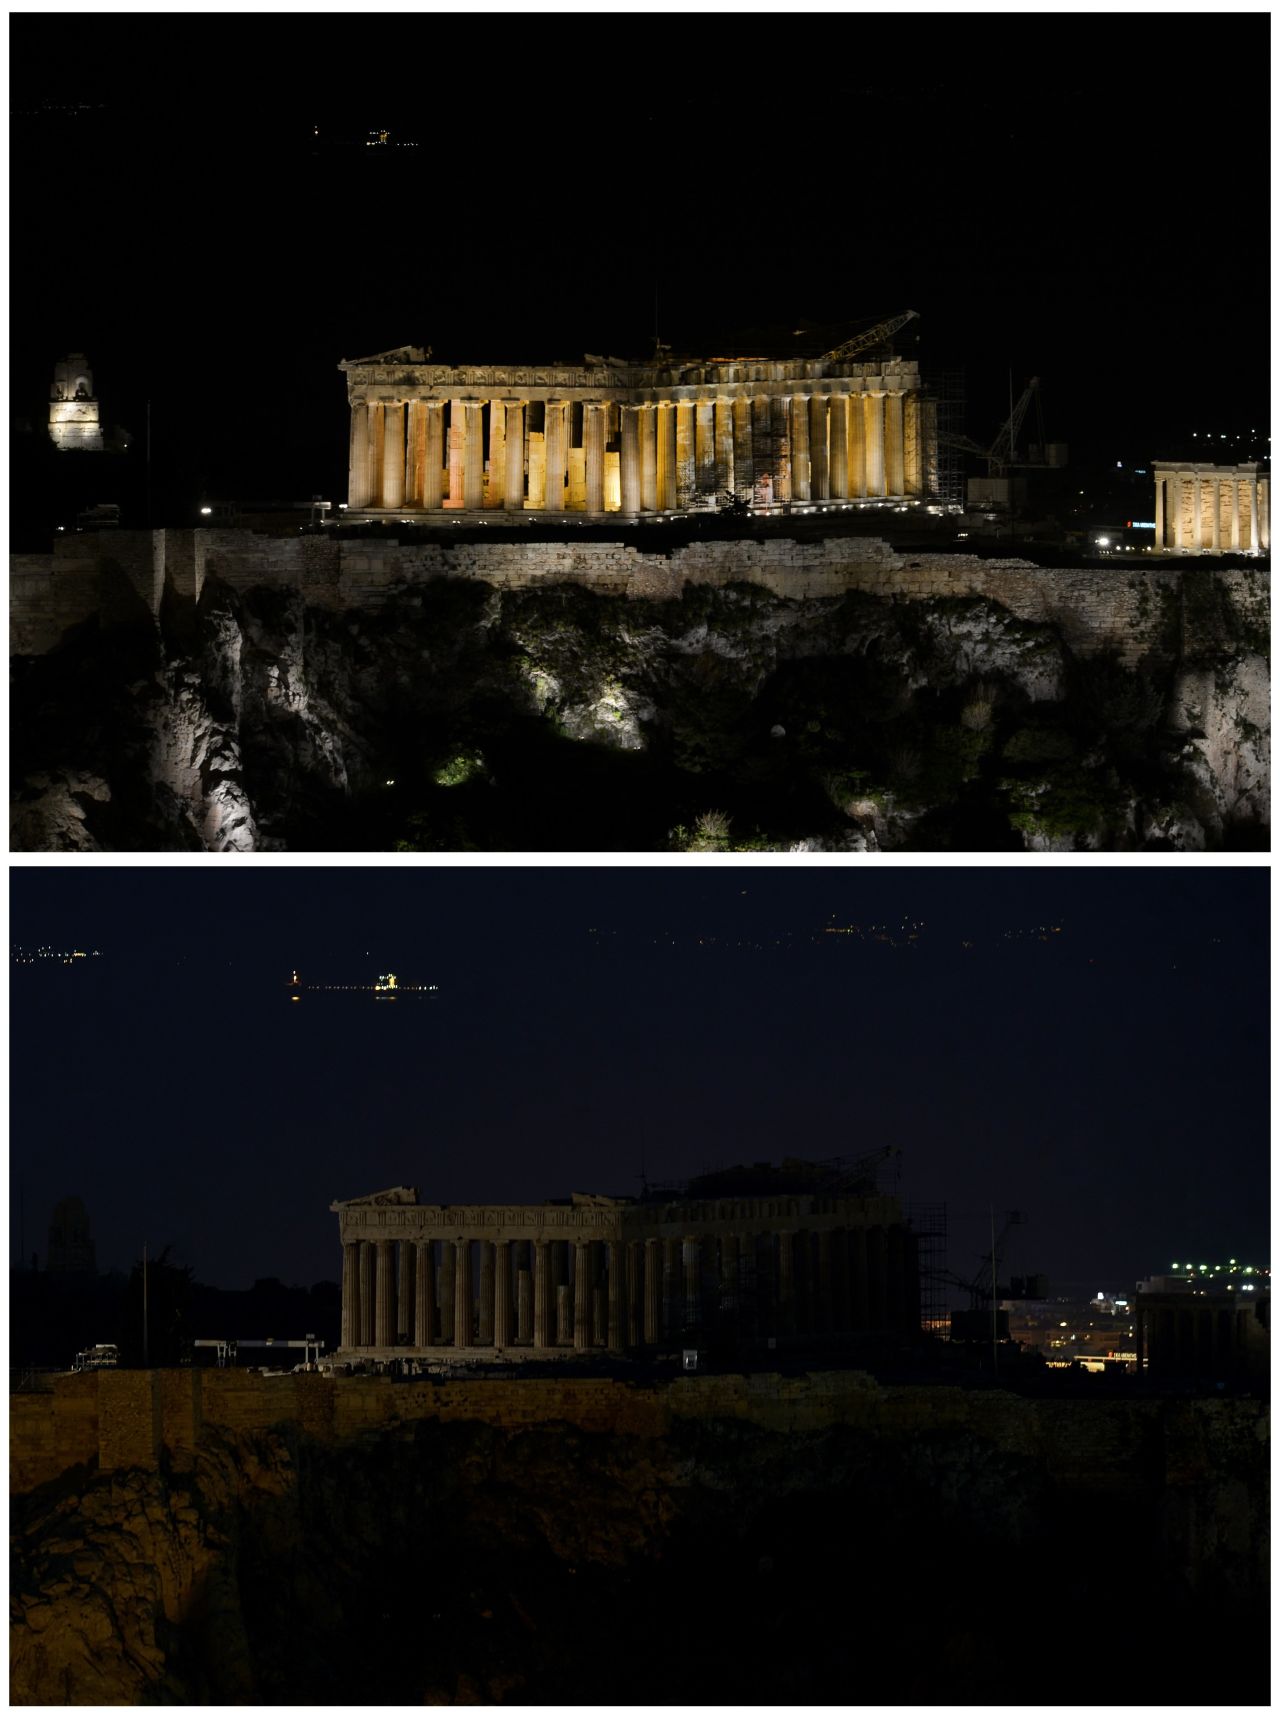 TheTemple of Parthenon atop the Acropolis hill during the Earth Hour in Athens.